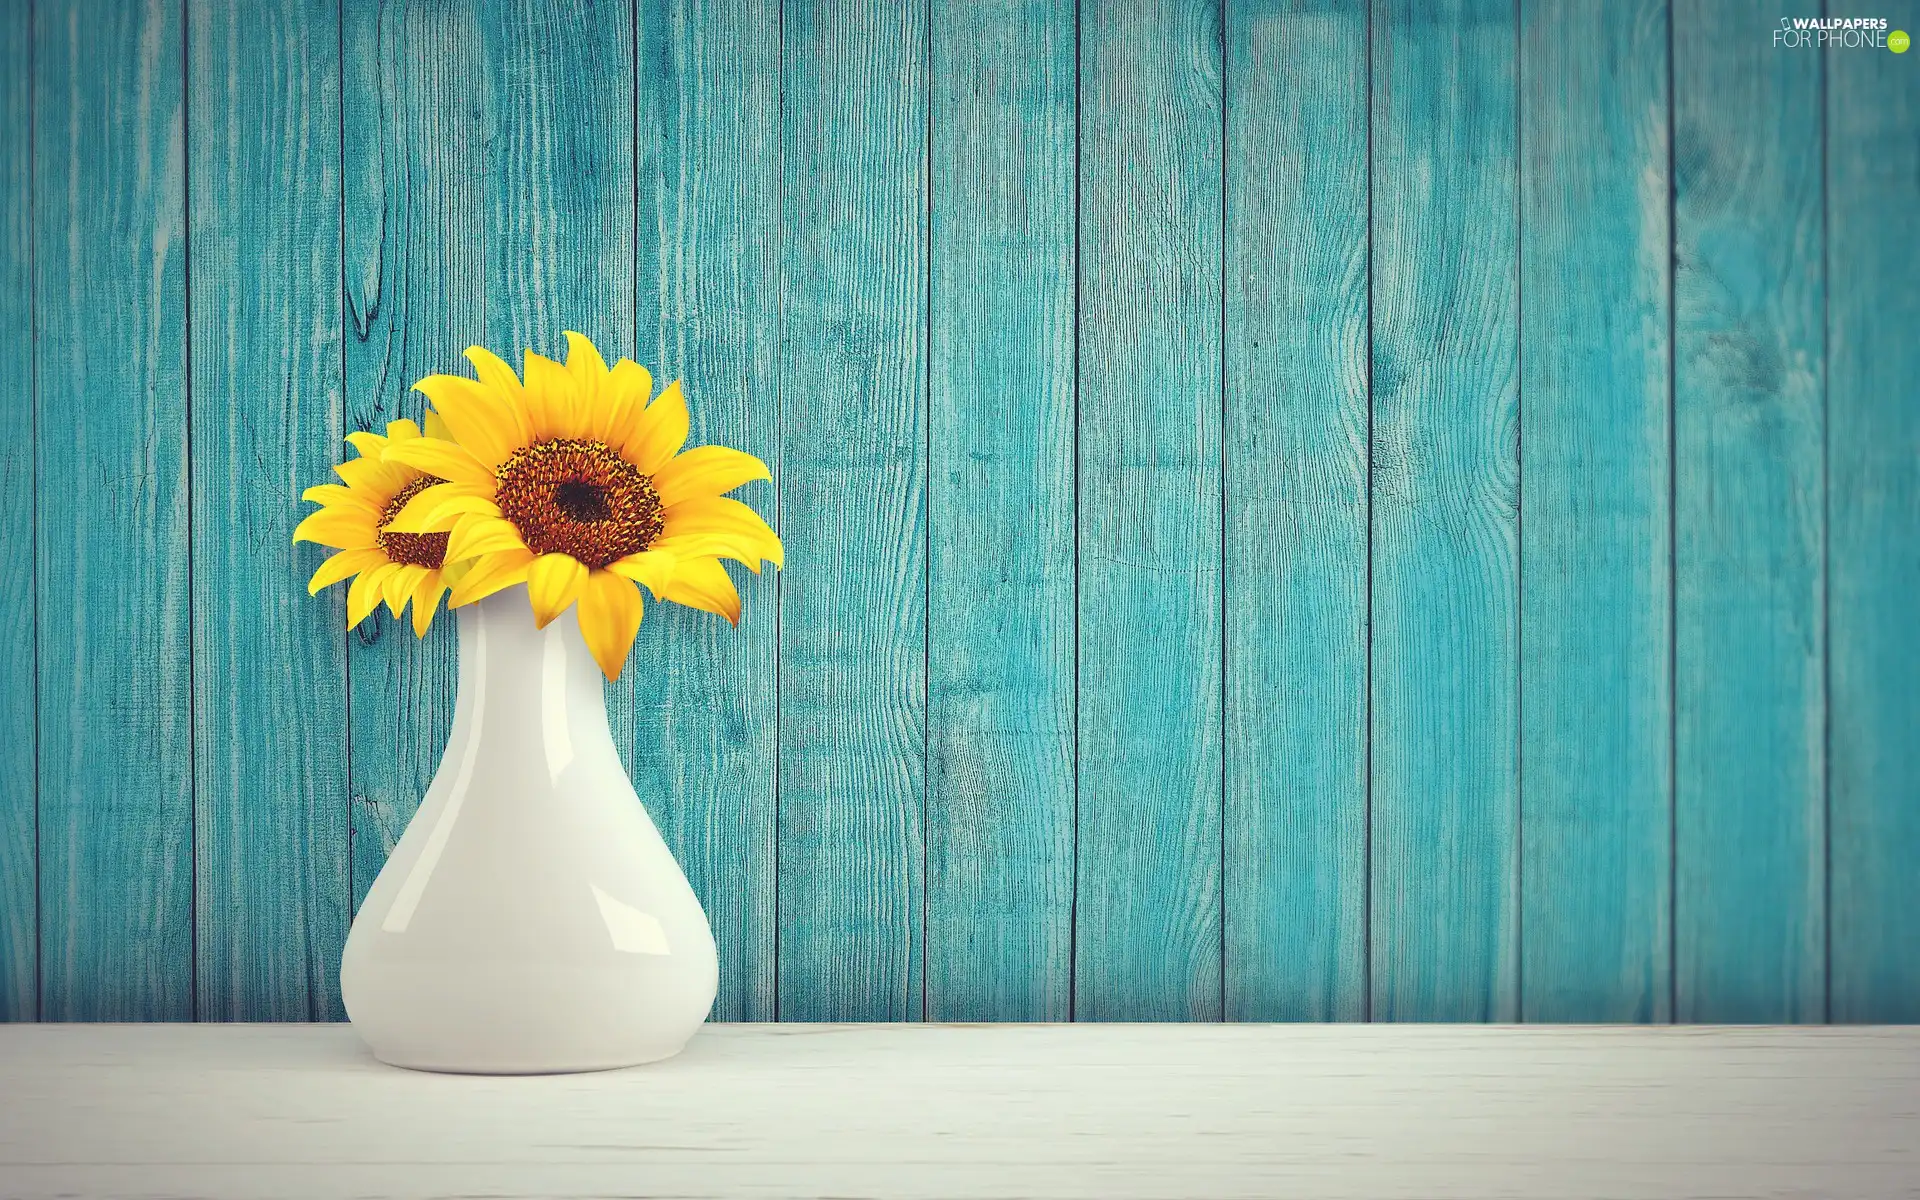 Blue, boarding, Two cars, decorative Sunflowers, vase